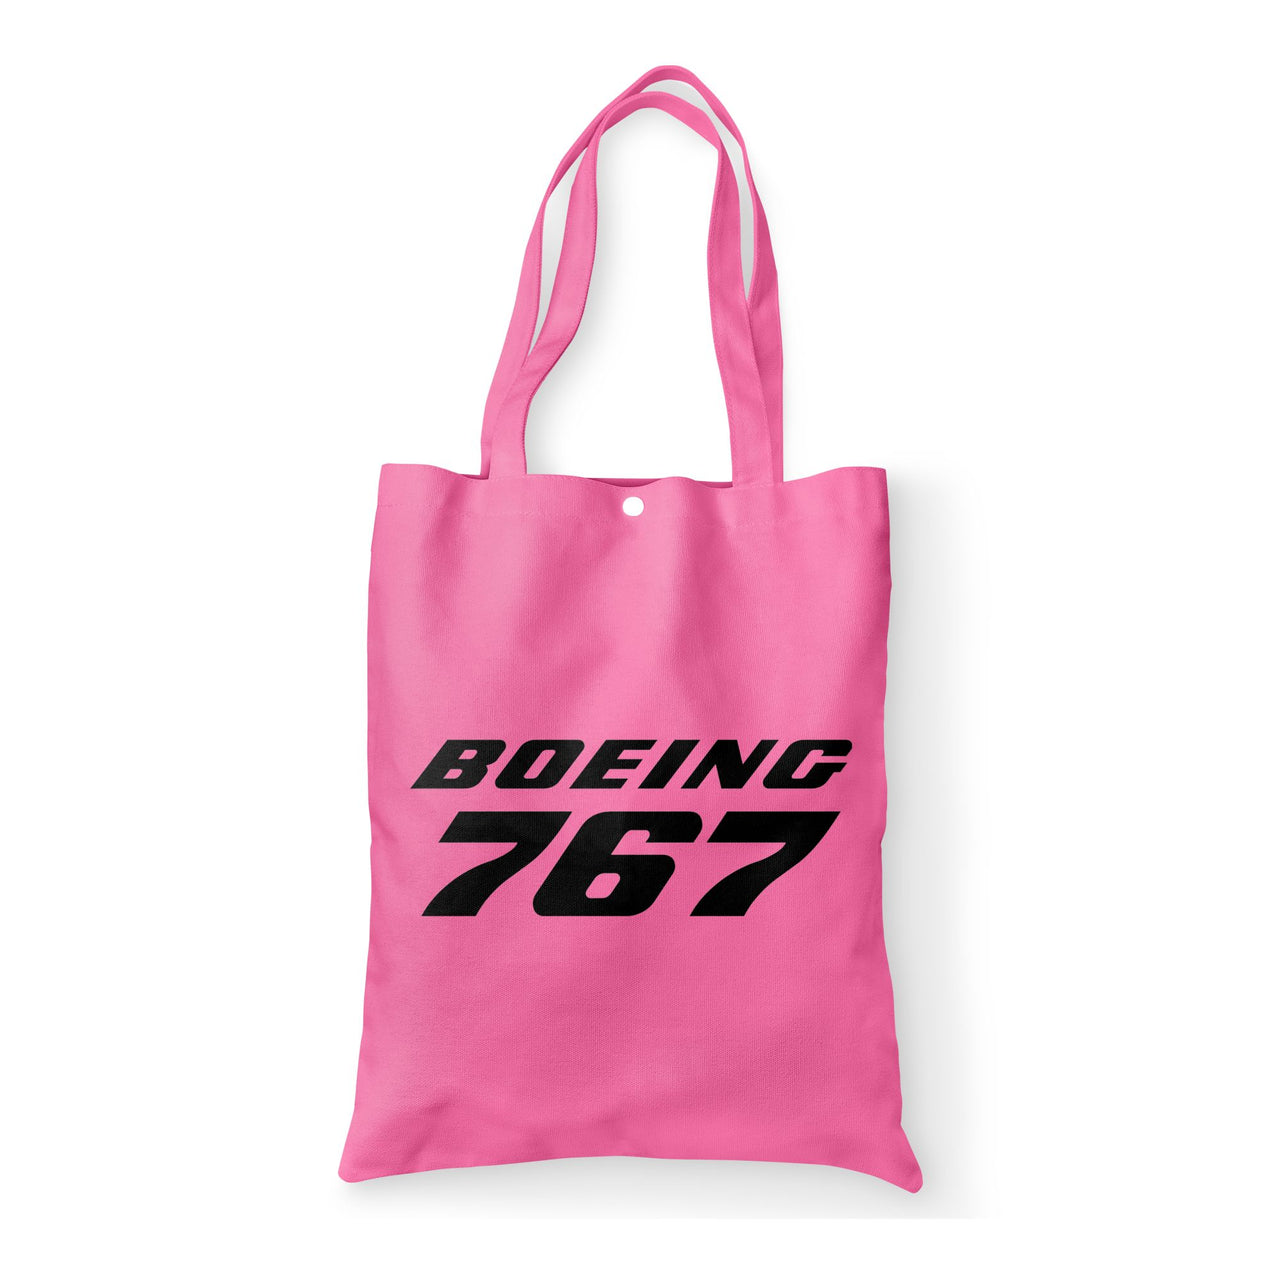 Boeing 767 & Text Designed Tote Bags